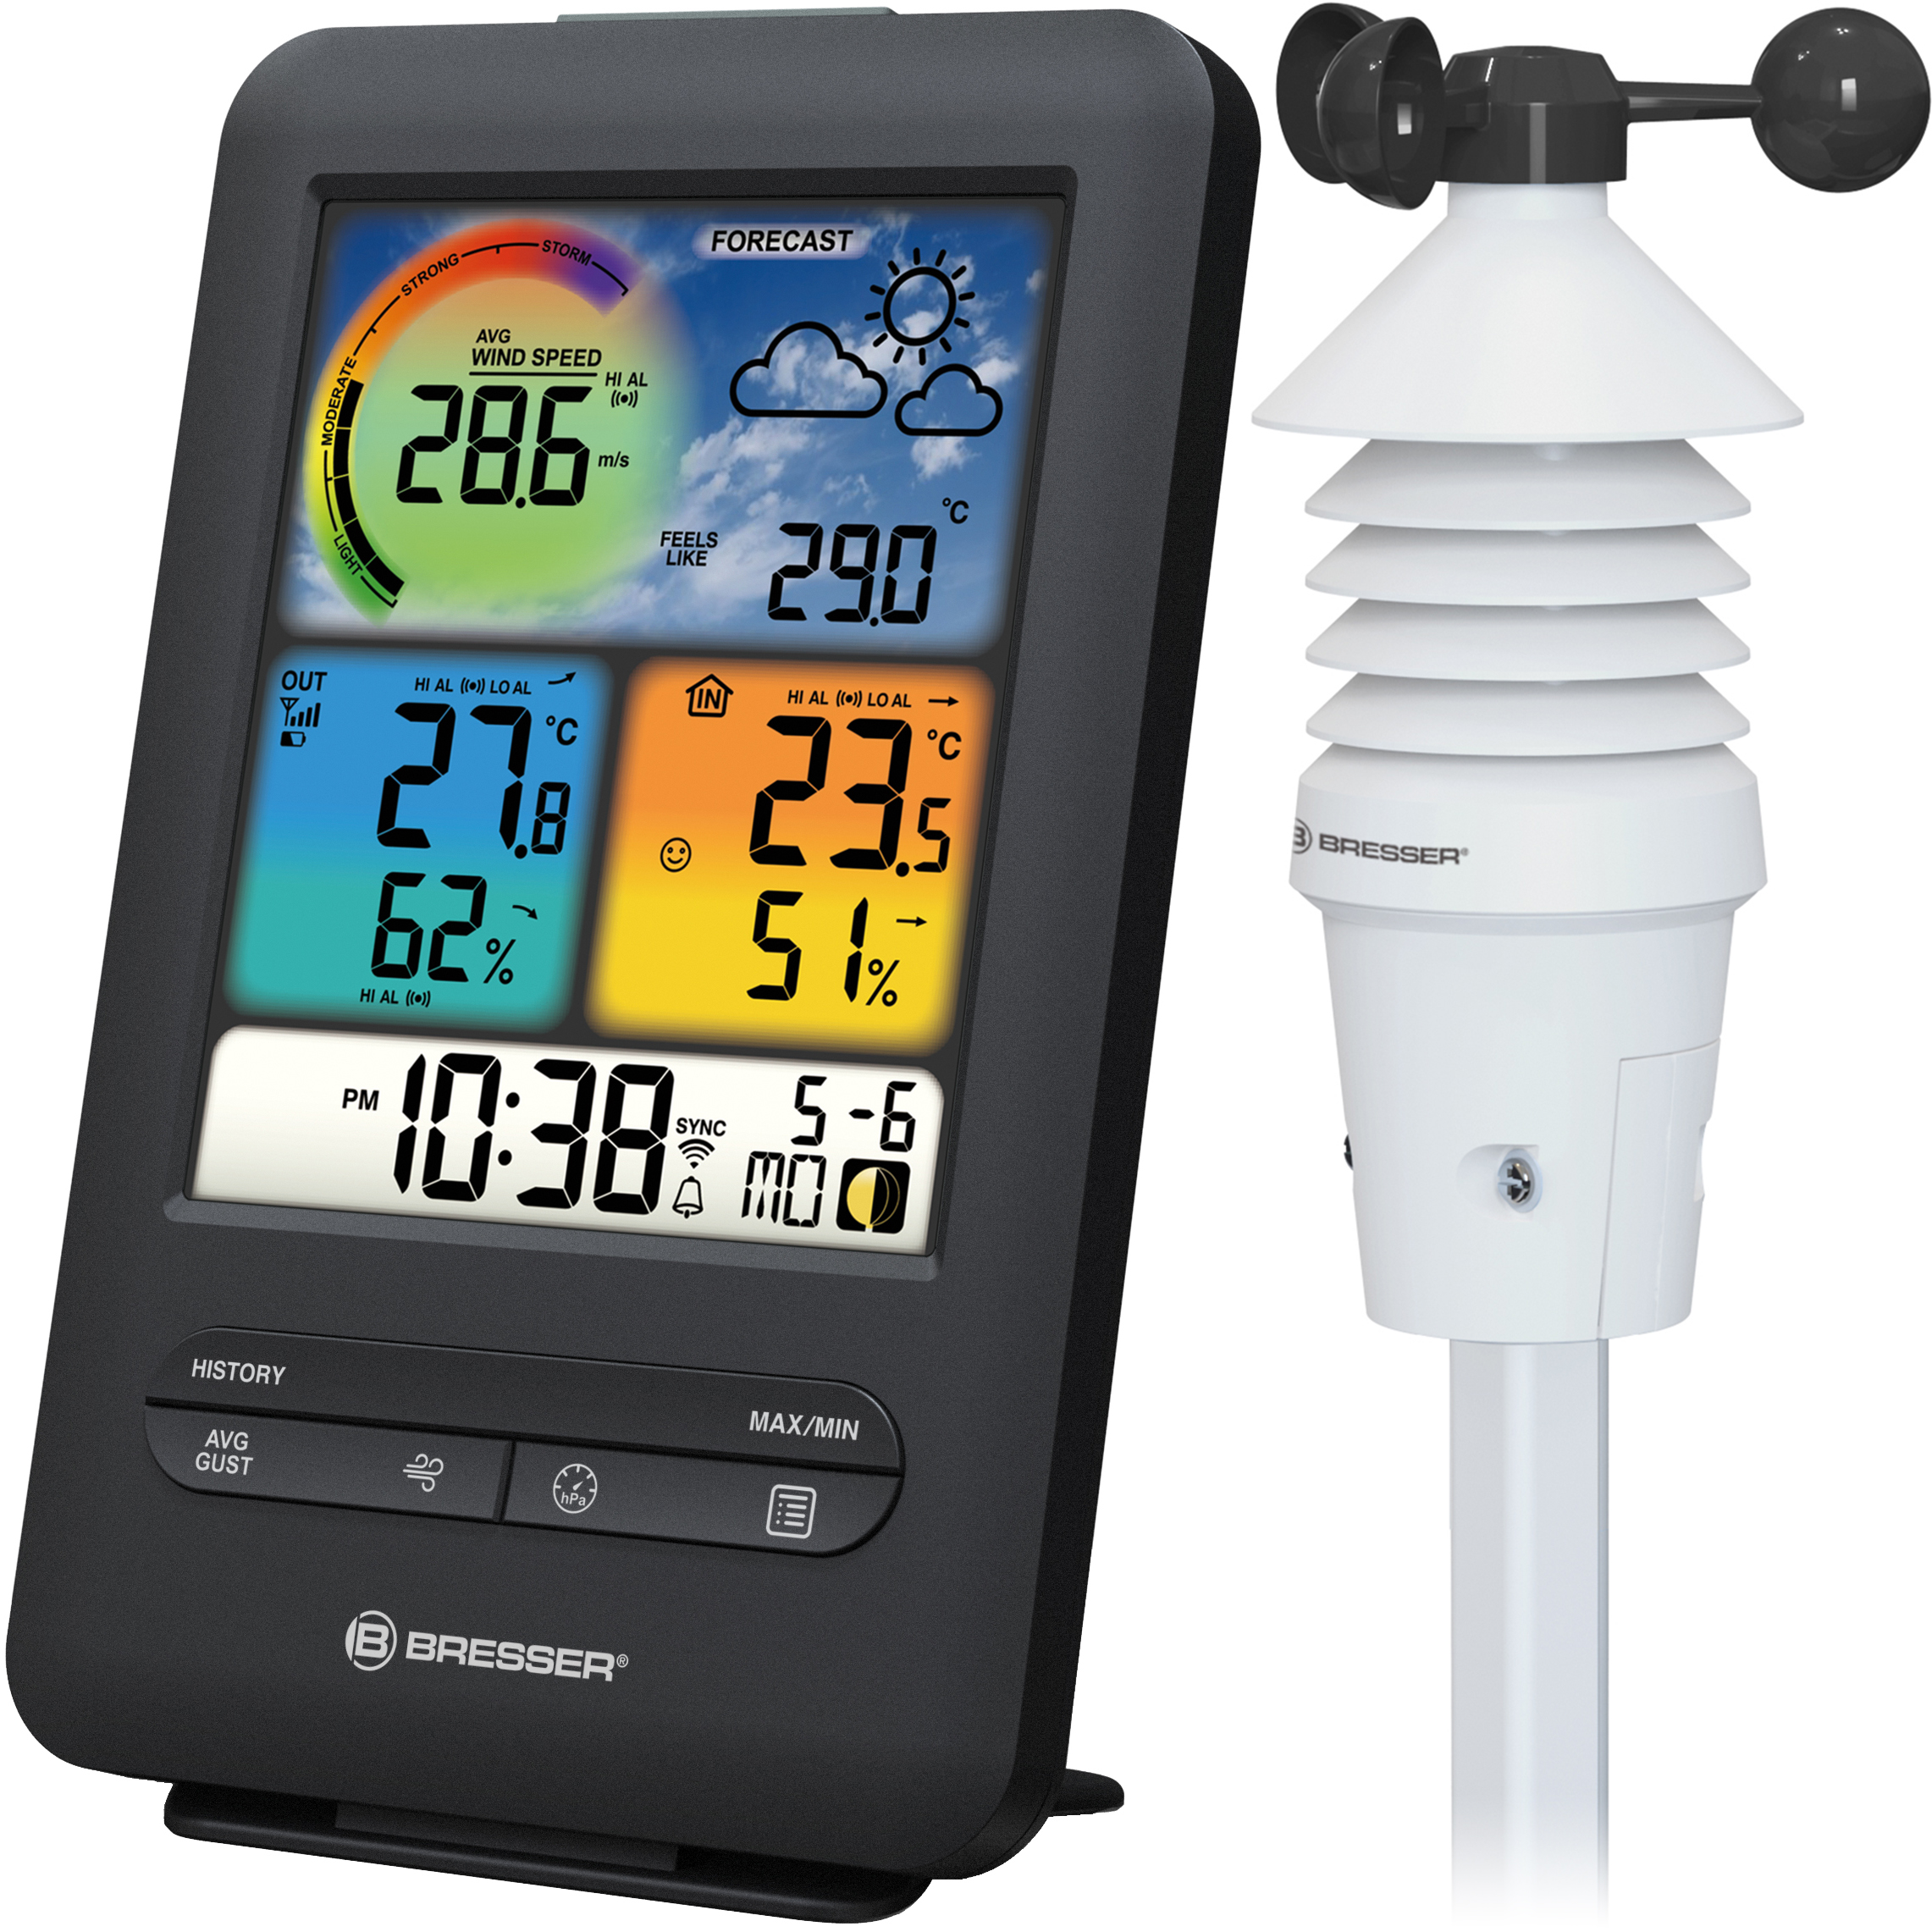 Bresser Wireless Weather Station with Outdoor Sensor WLAN Professional Wind Gauge 3-in-1 with Colour Display